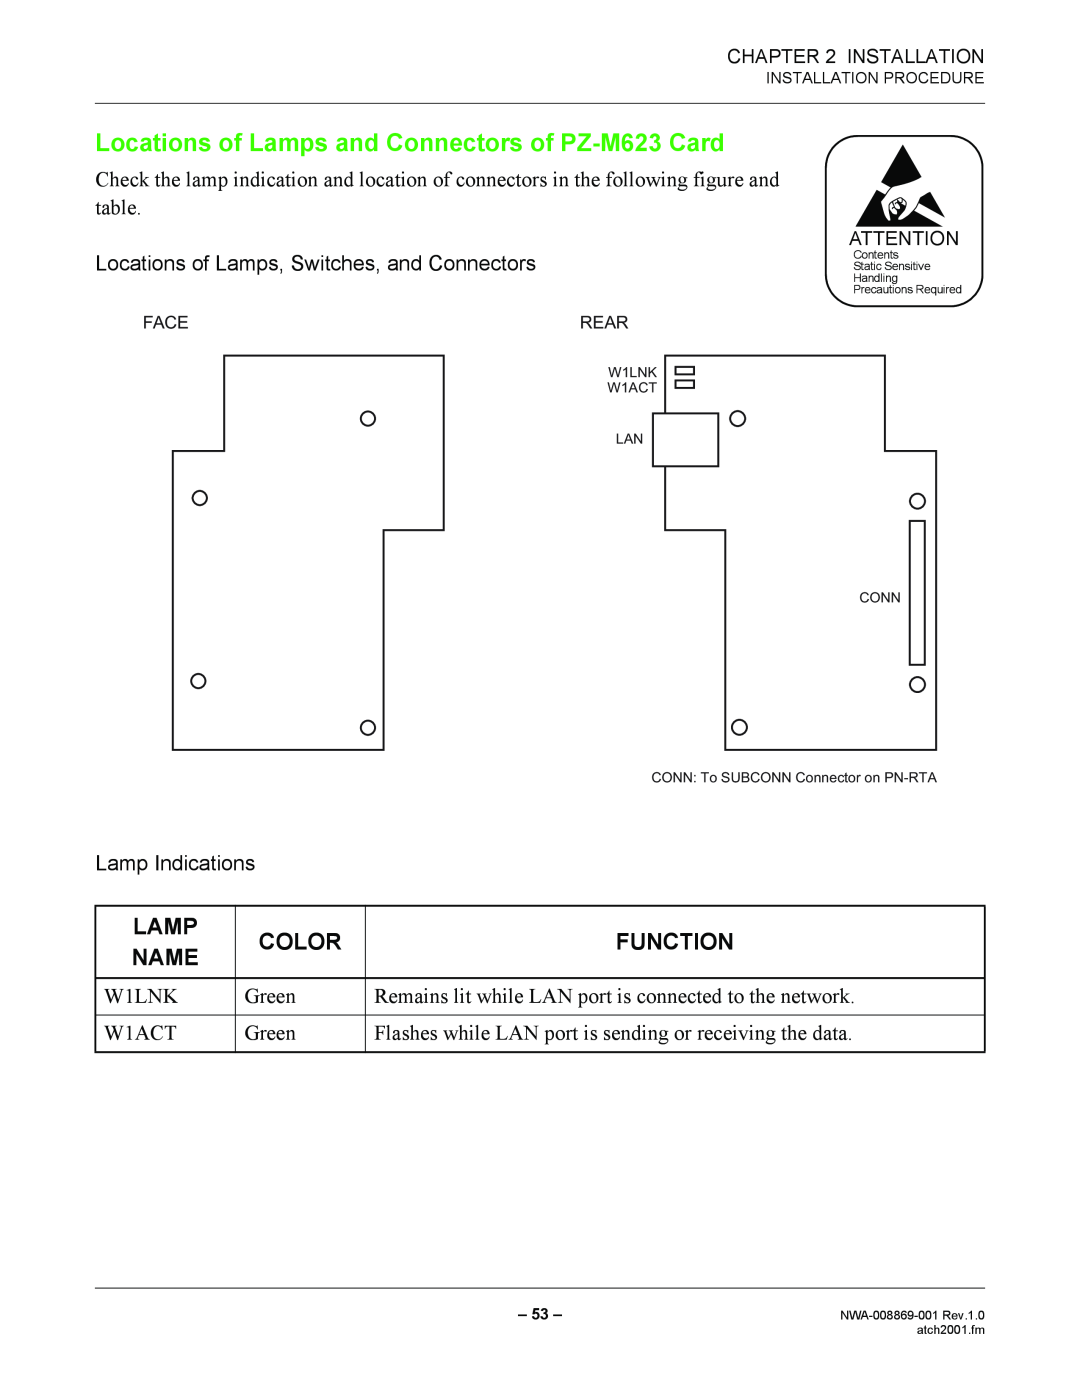 NEC NWA-008869-001 manual Locations of Lamps and Connectors of PZ-M623 Card, Color, Function, Name 